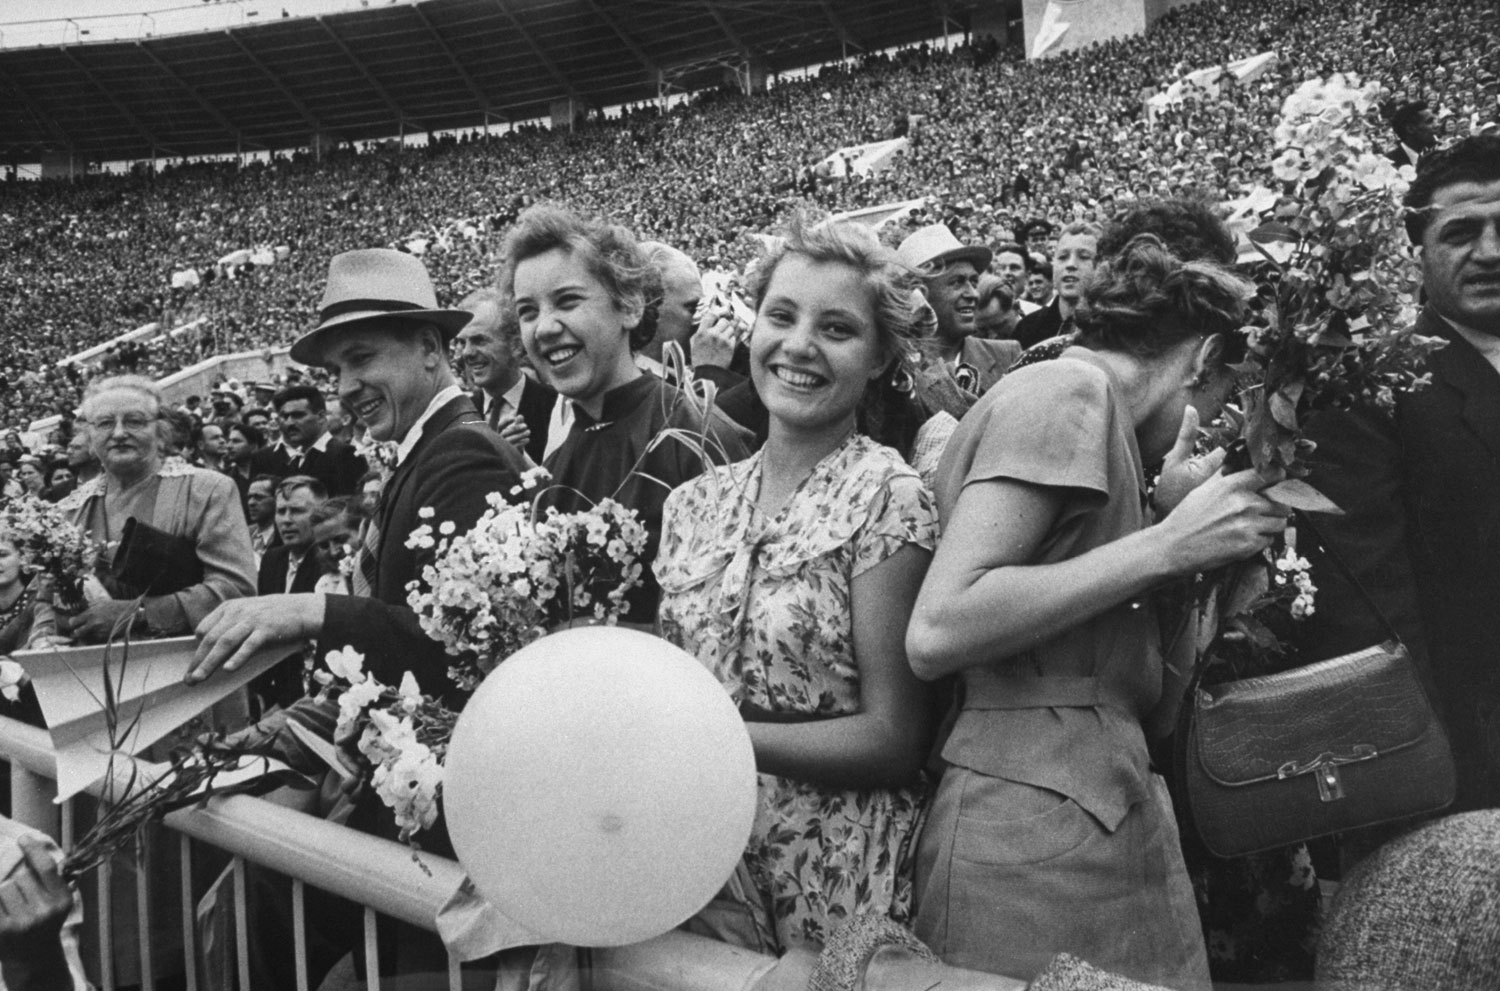 Crowd at Lenin Stadium during a sports festival, with some holding flowers for the winning athletes, 1956.